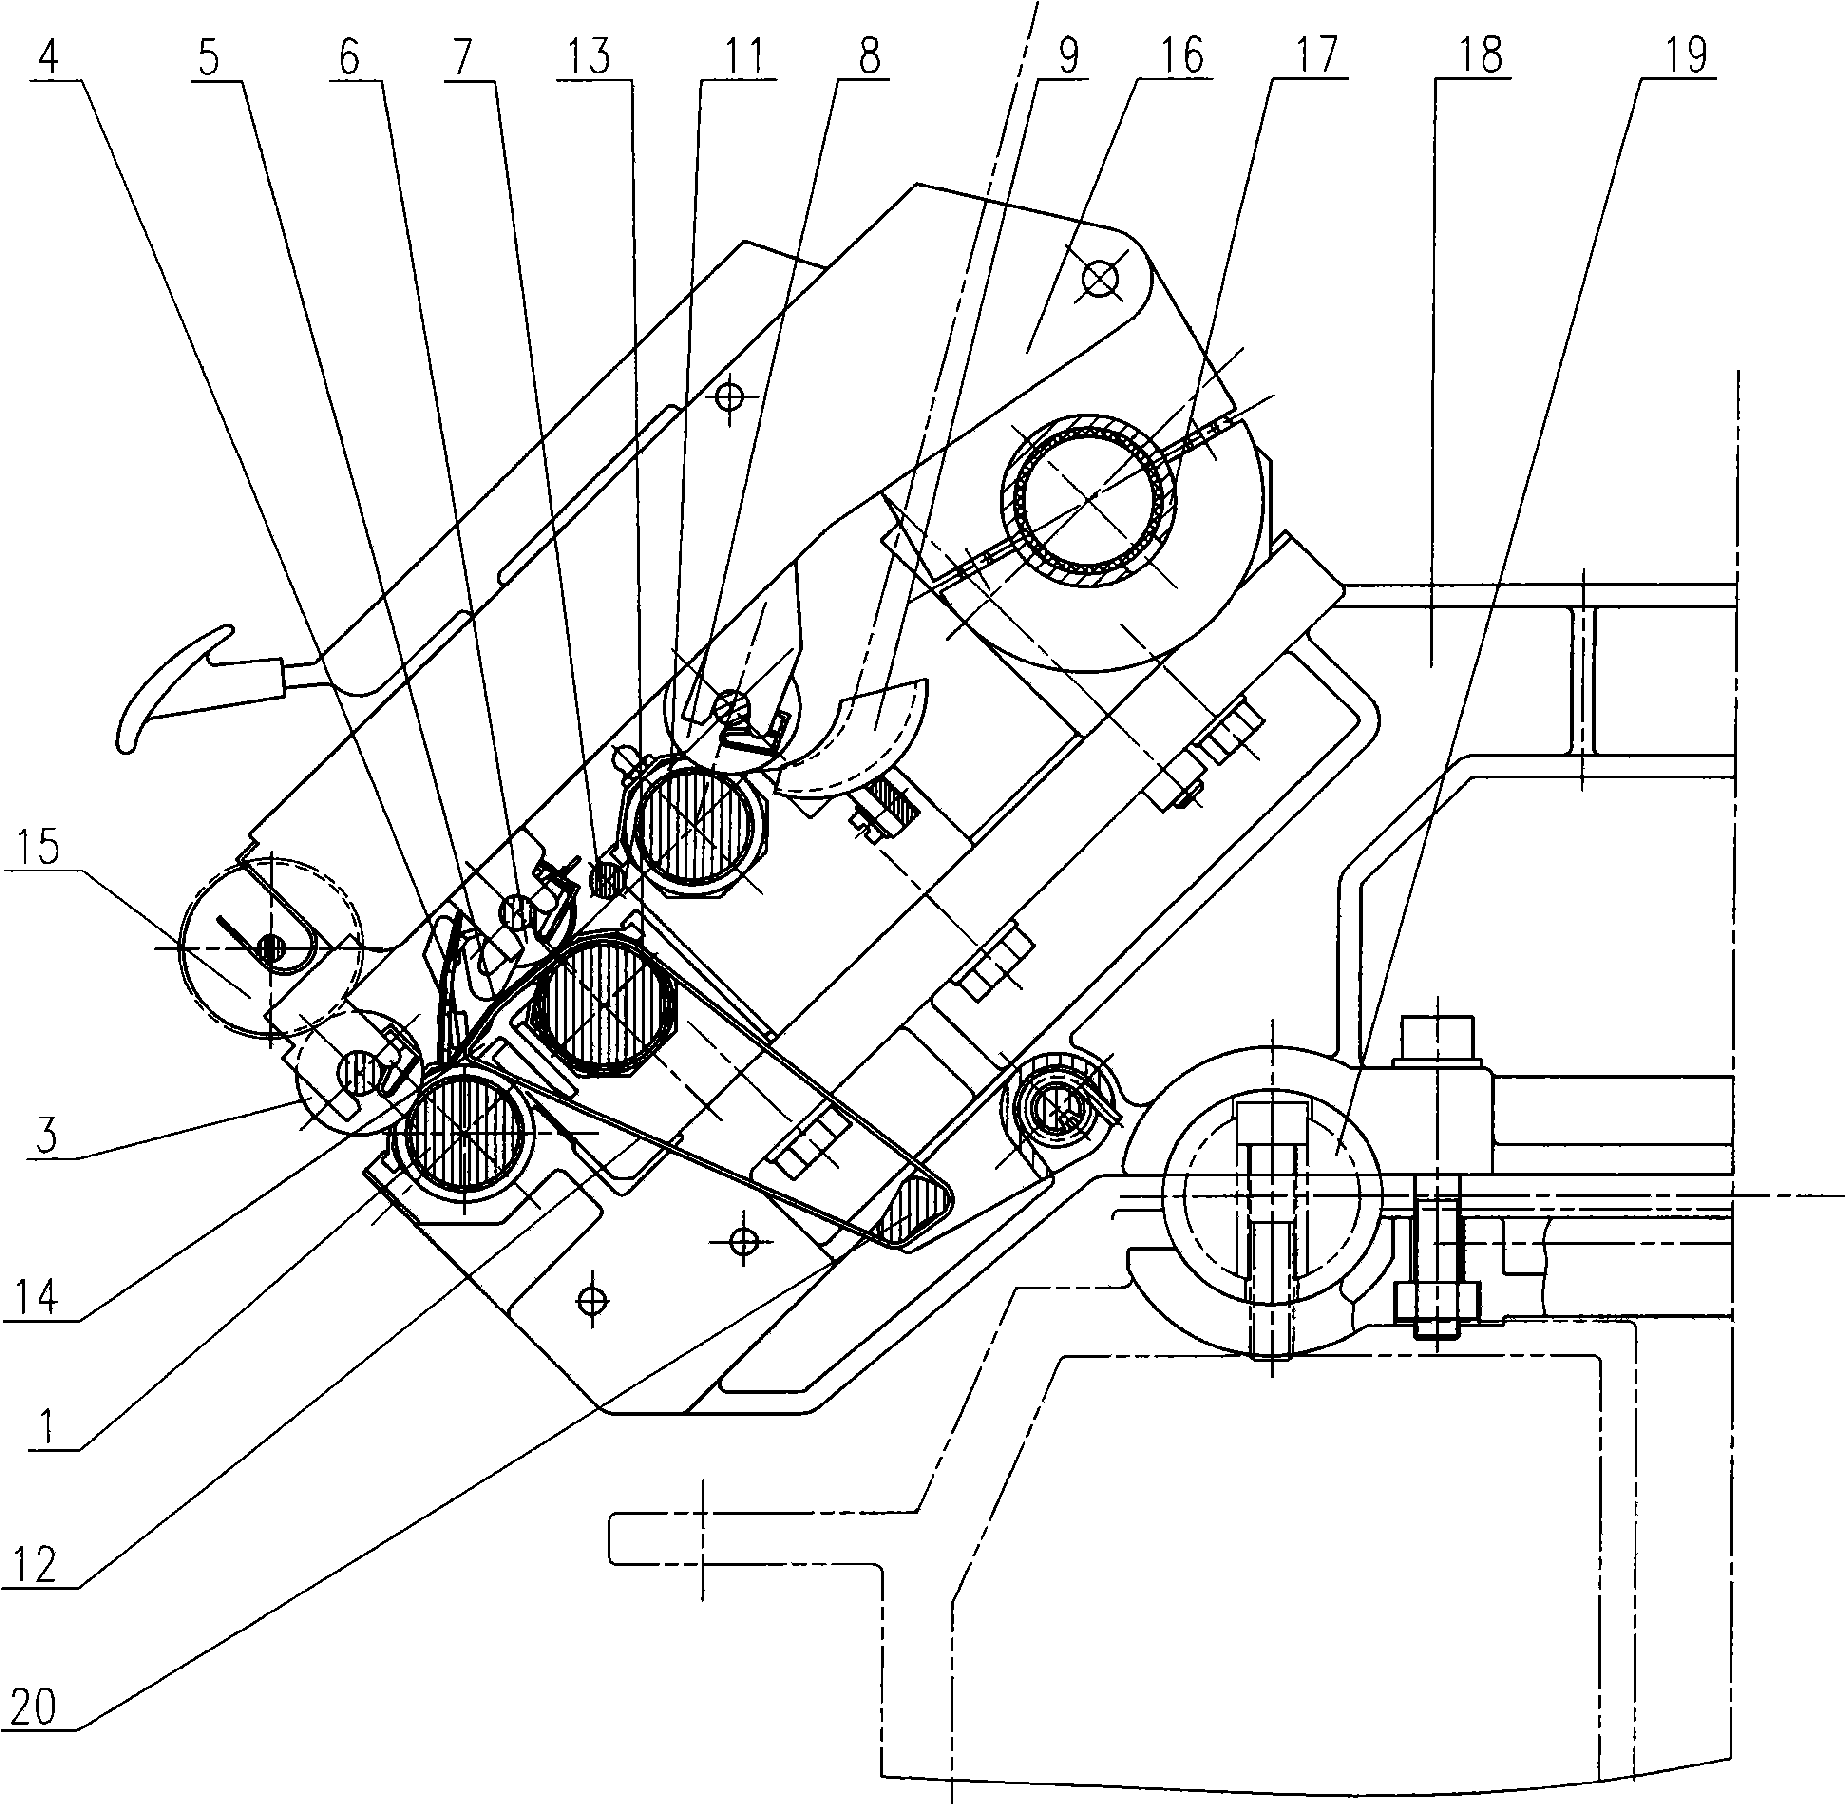 High power drafting device for ring spinning frame